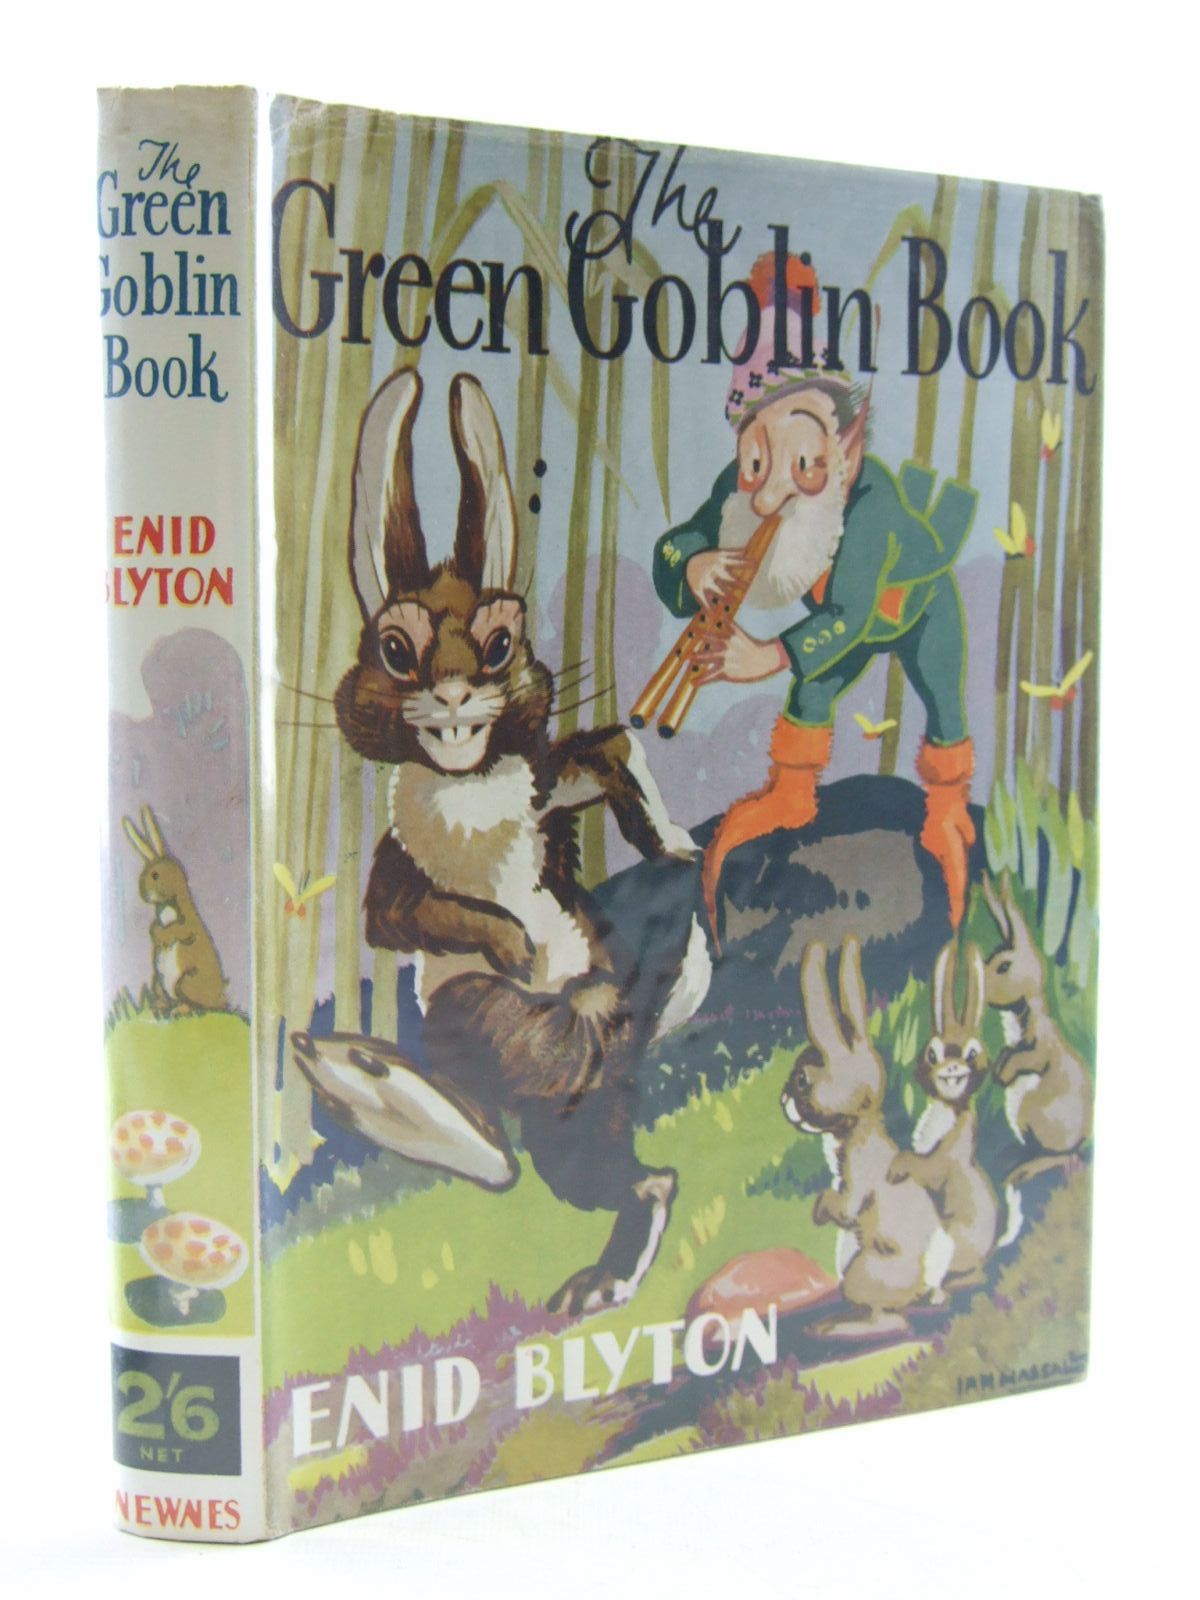 Cover of THE GREEN GOBLIN BOOK by Enid Blyton